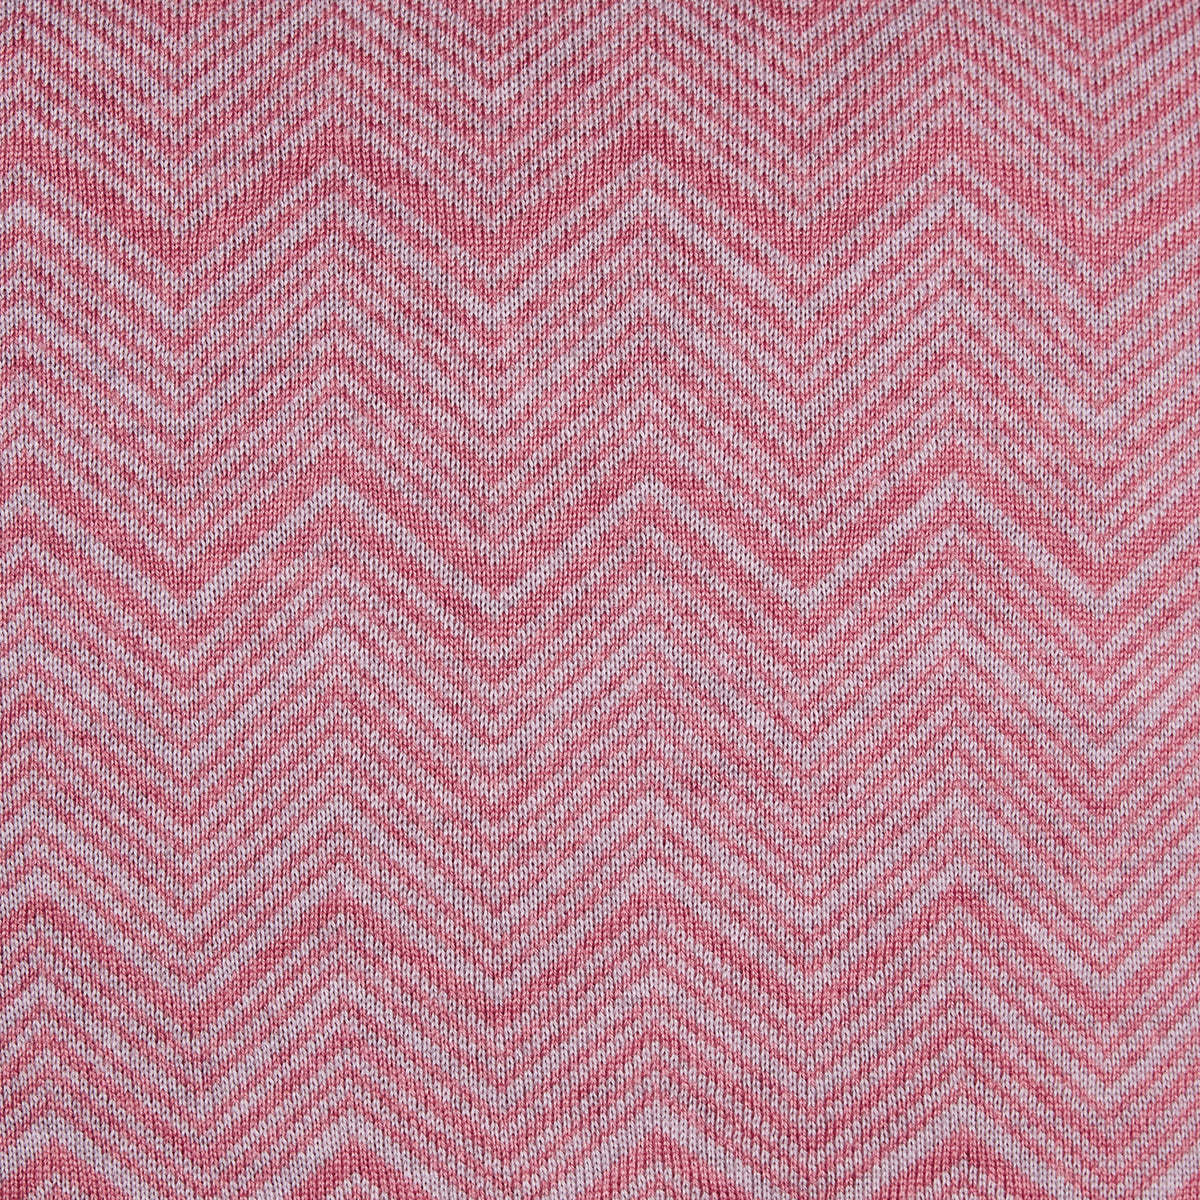 ZigZag Candy Pink and Pearl Grey Cushion